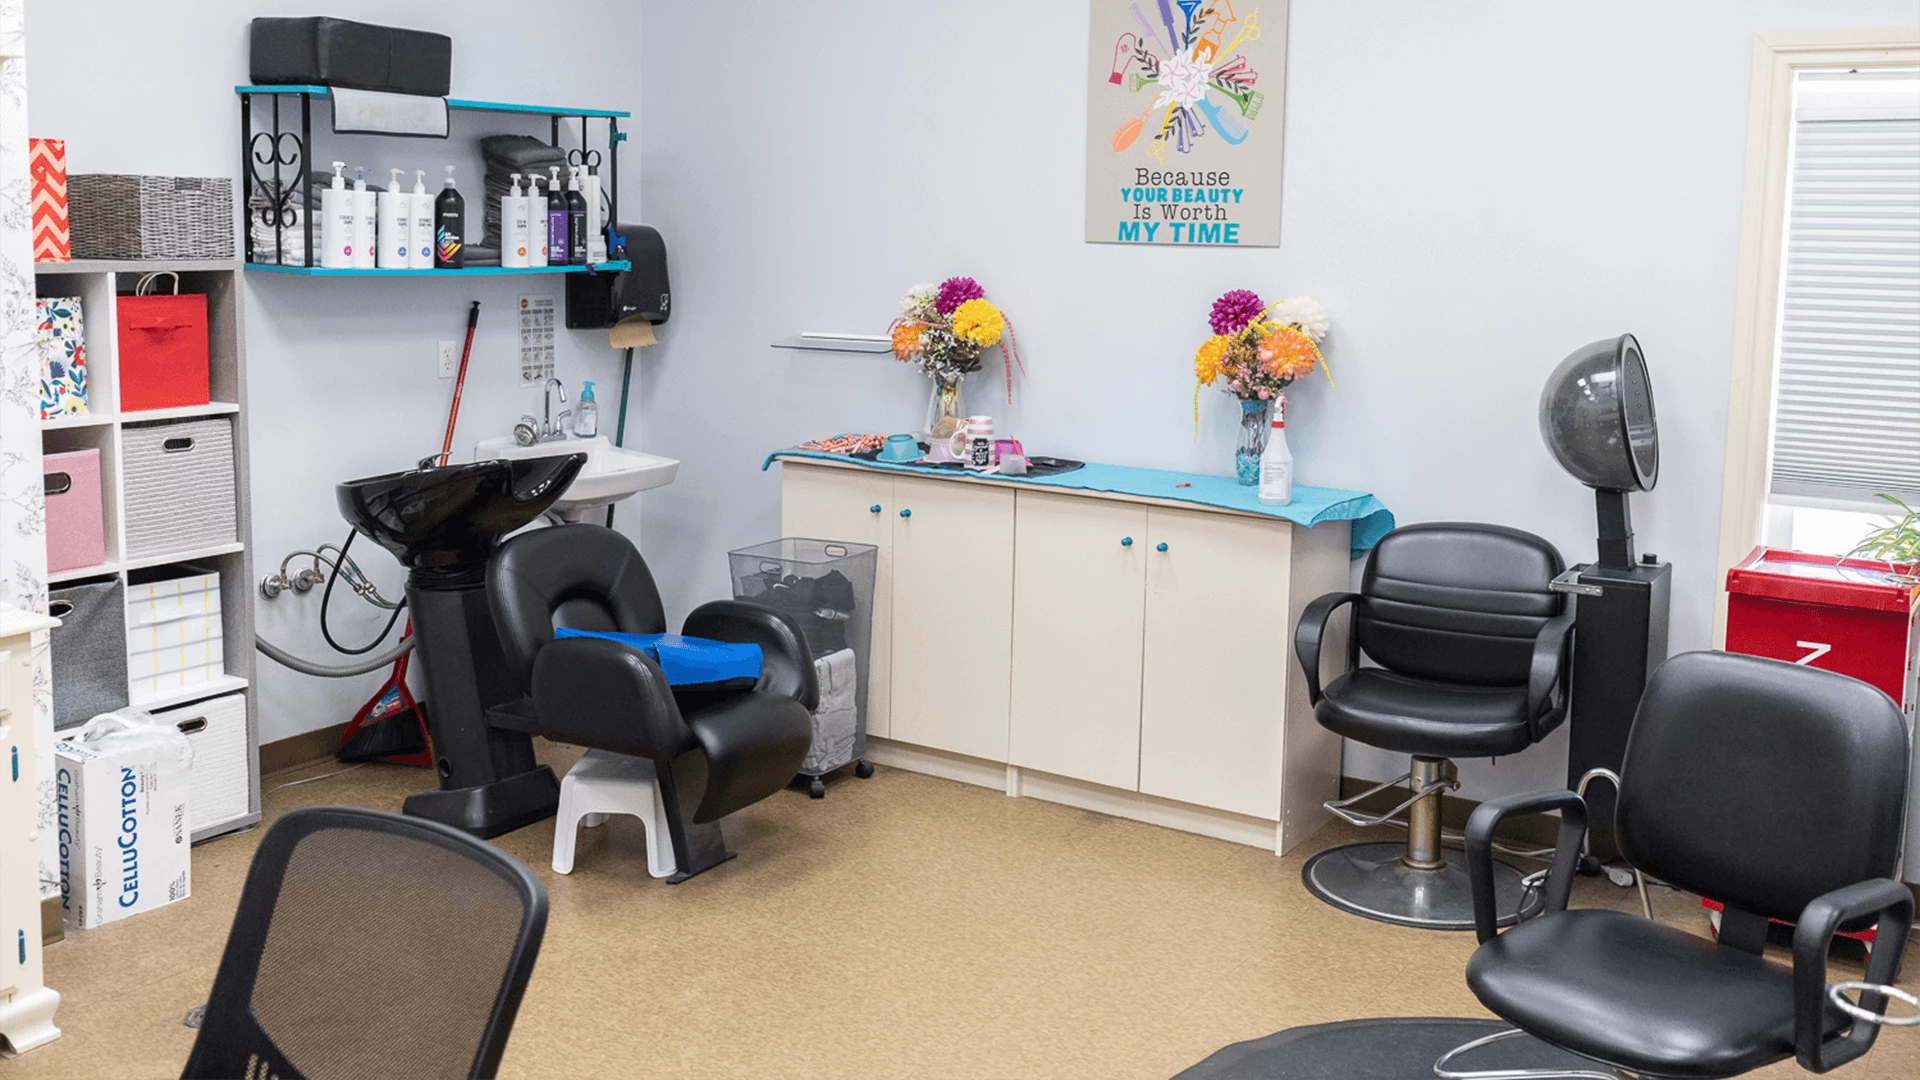 A salon facility is also provided at Cedarwood Station residence